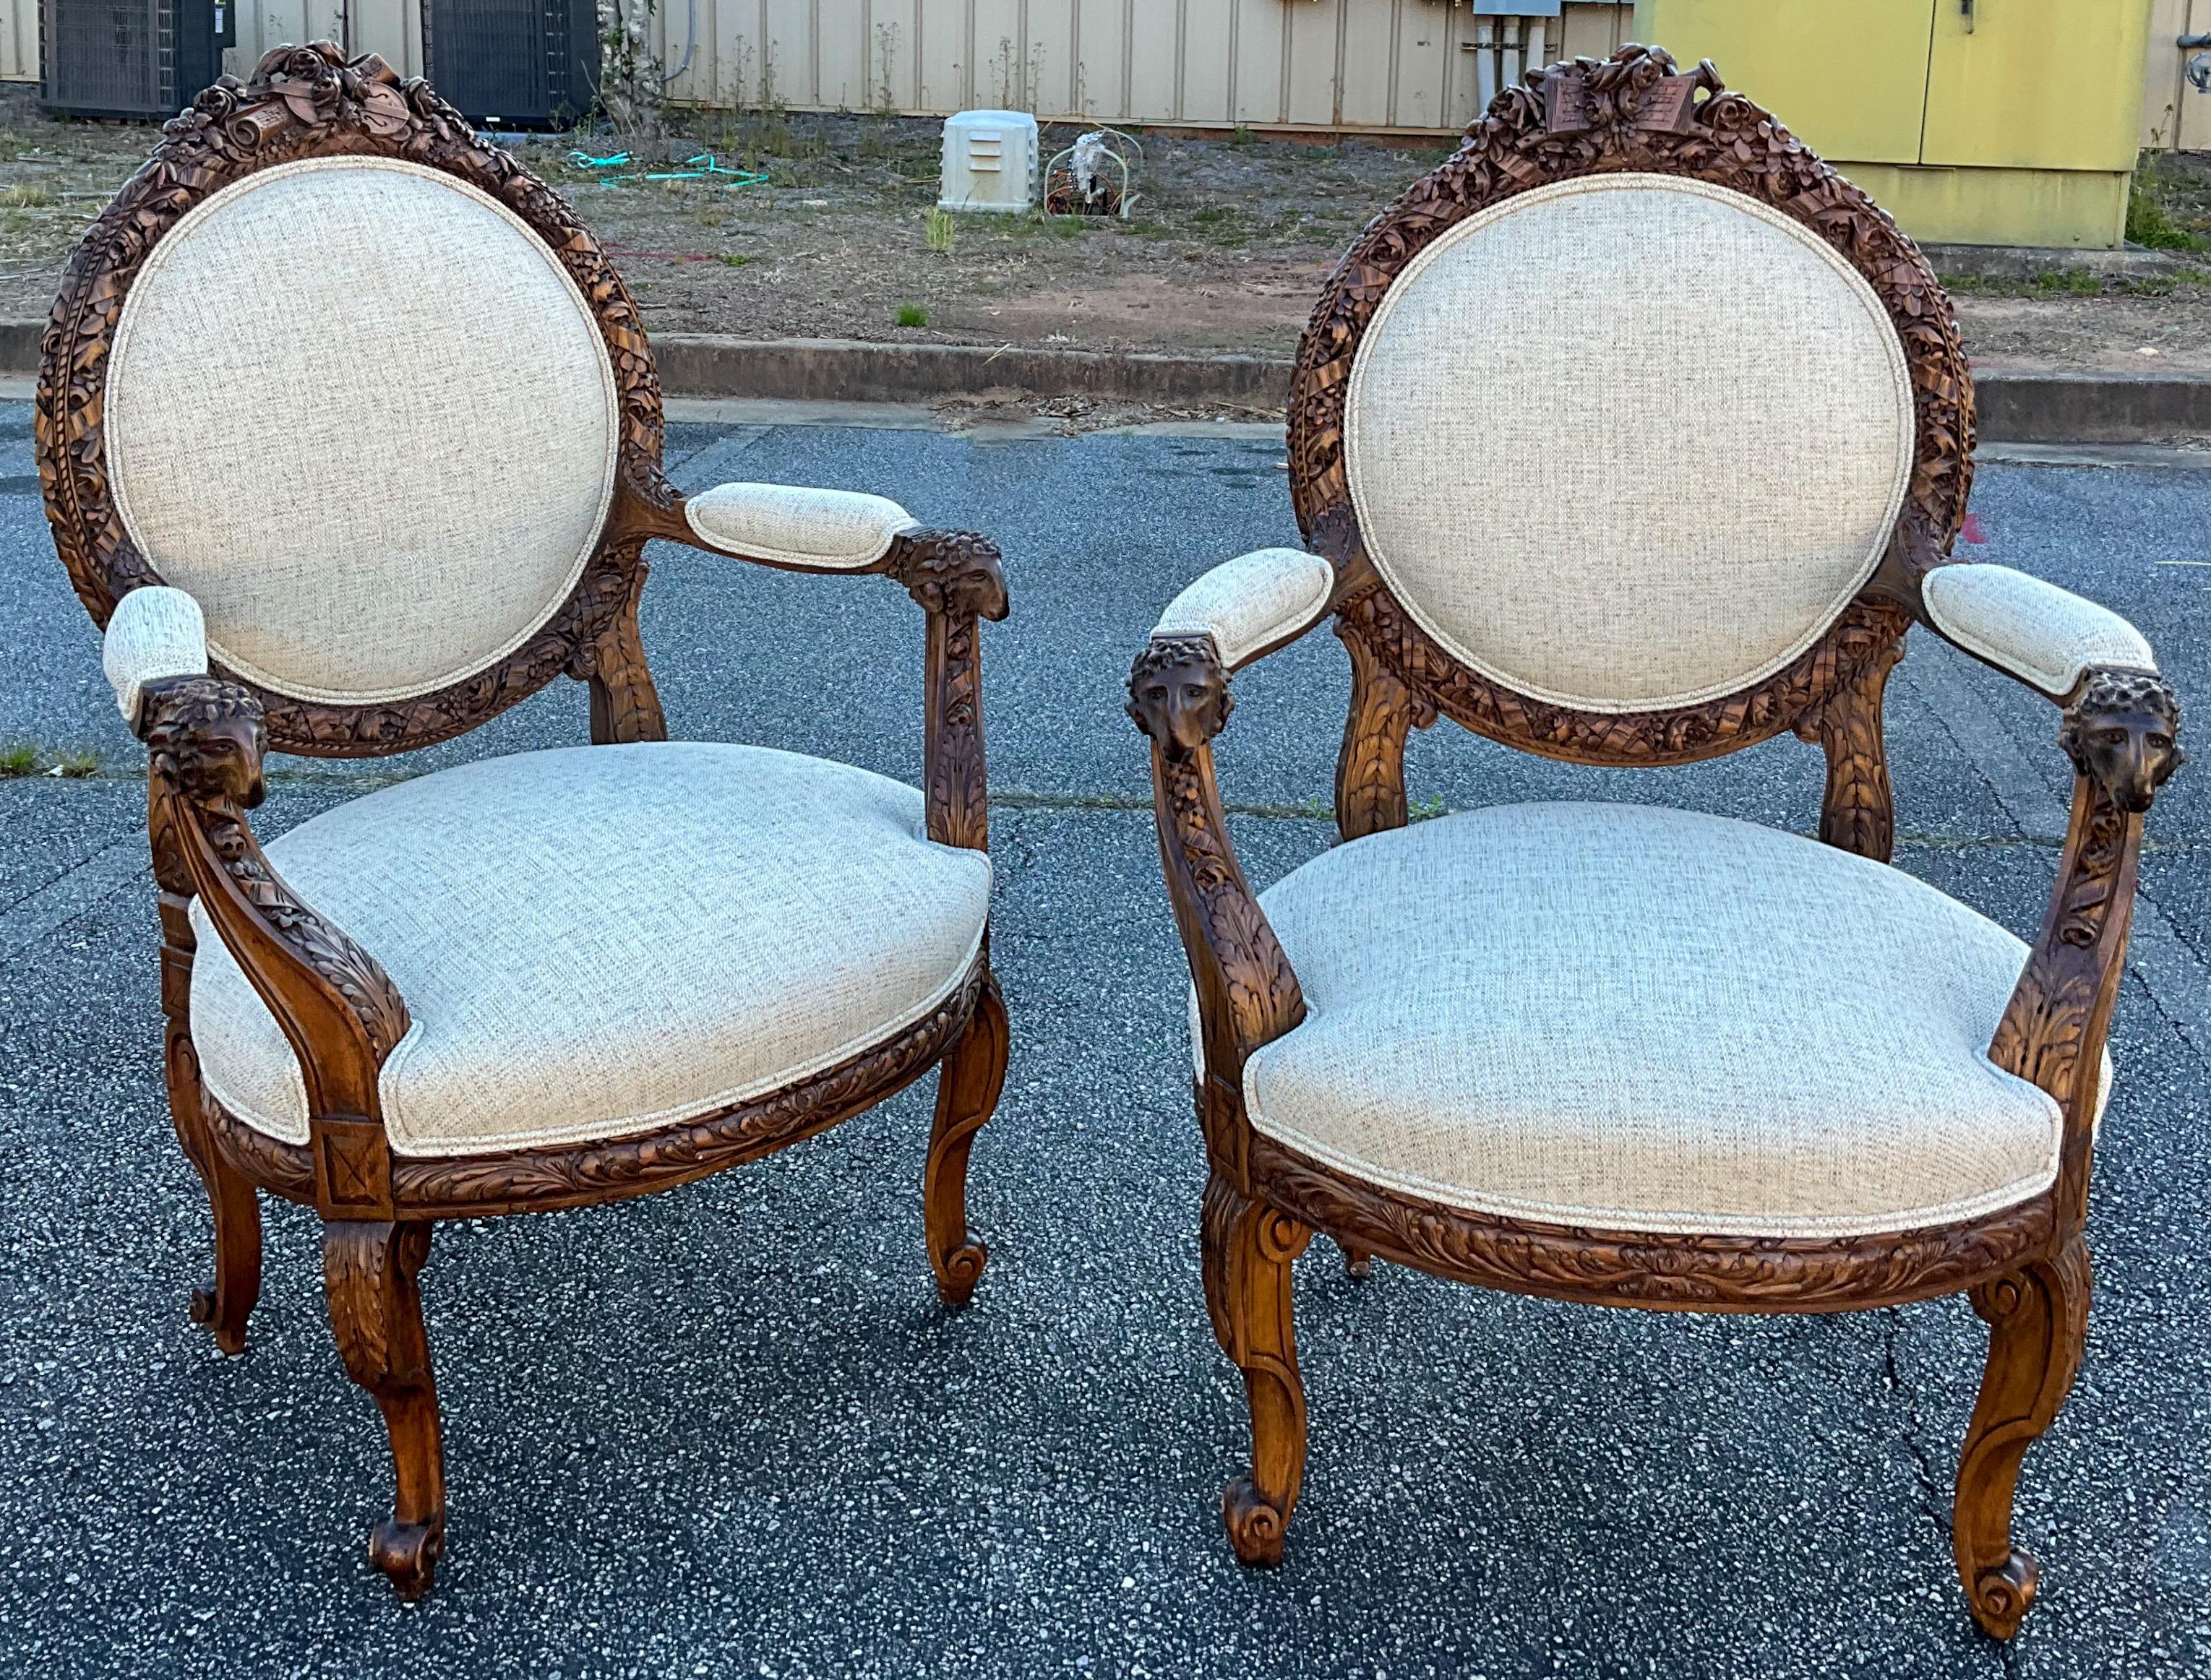 19th-C. French Neo-Classical Carved Walnut Bergere Chairs with Rams, Pair For Sale 2